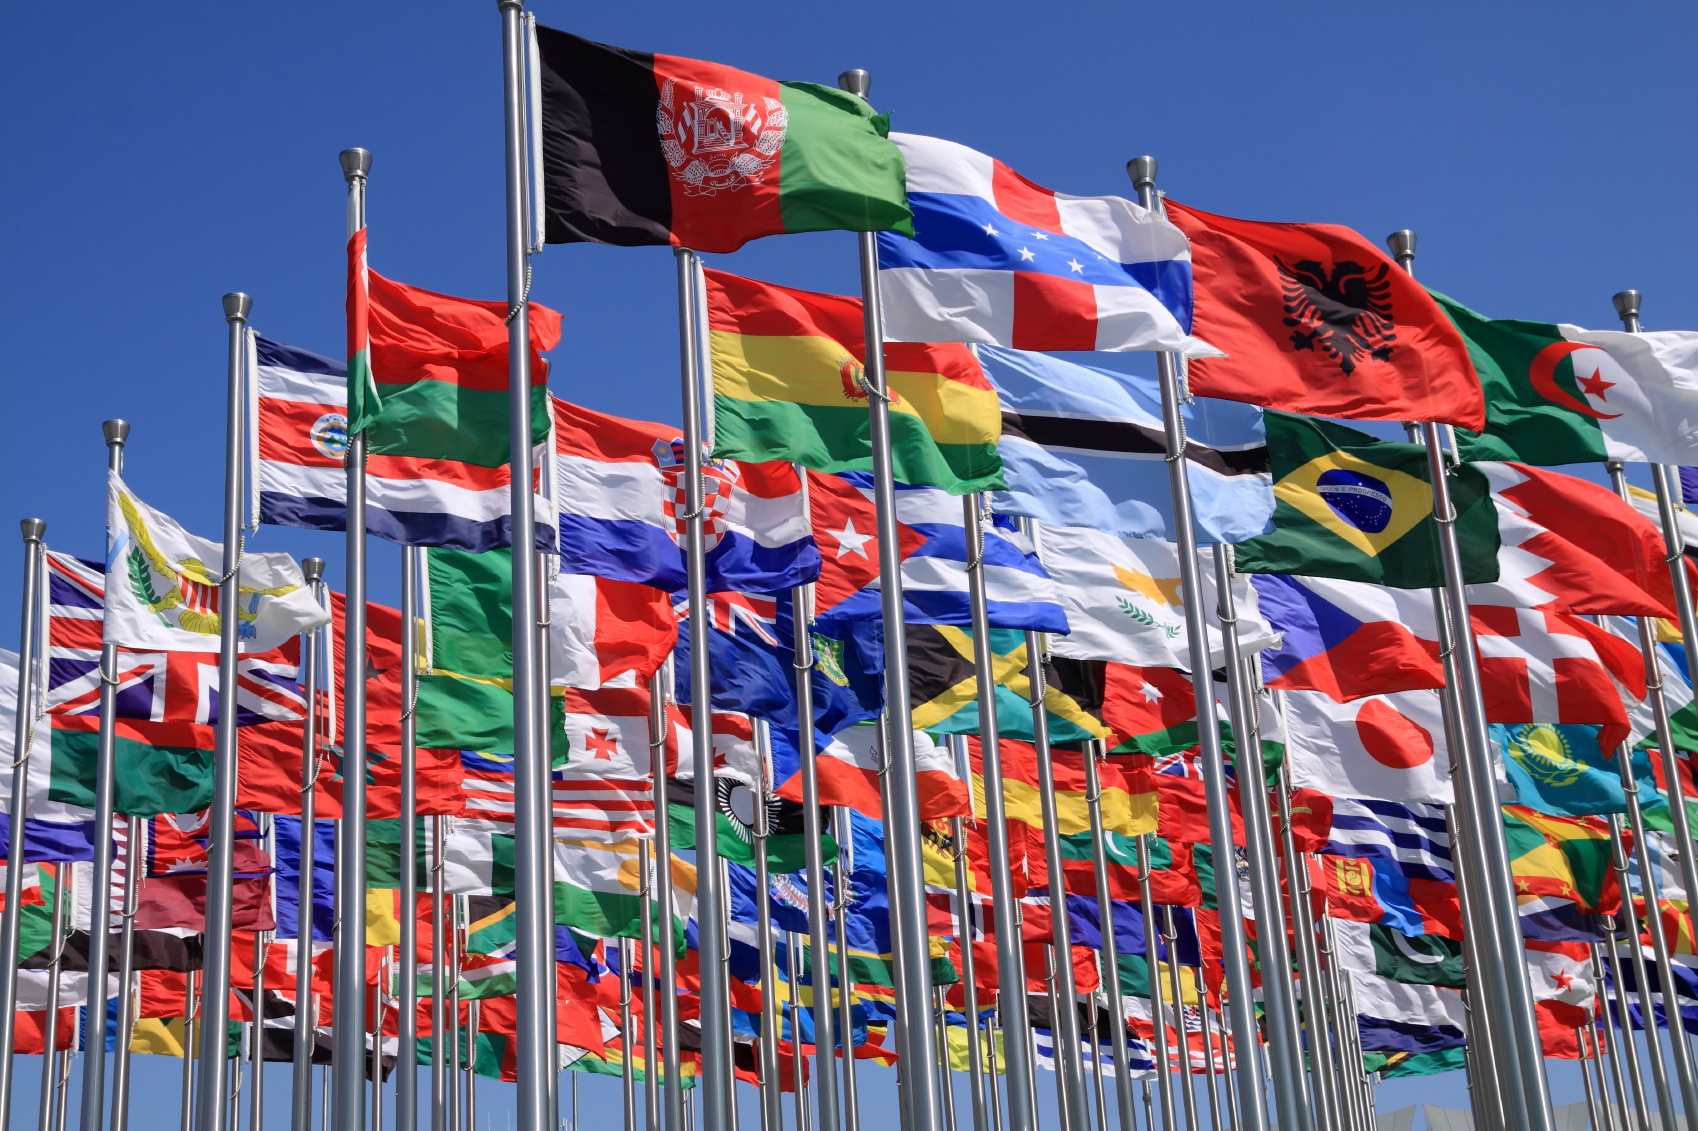 A massive cluster of country flags from around the world